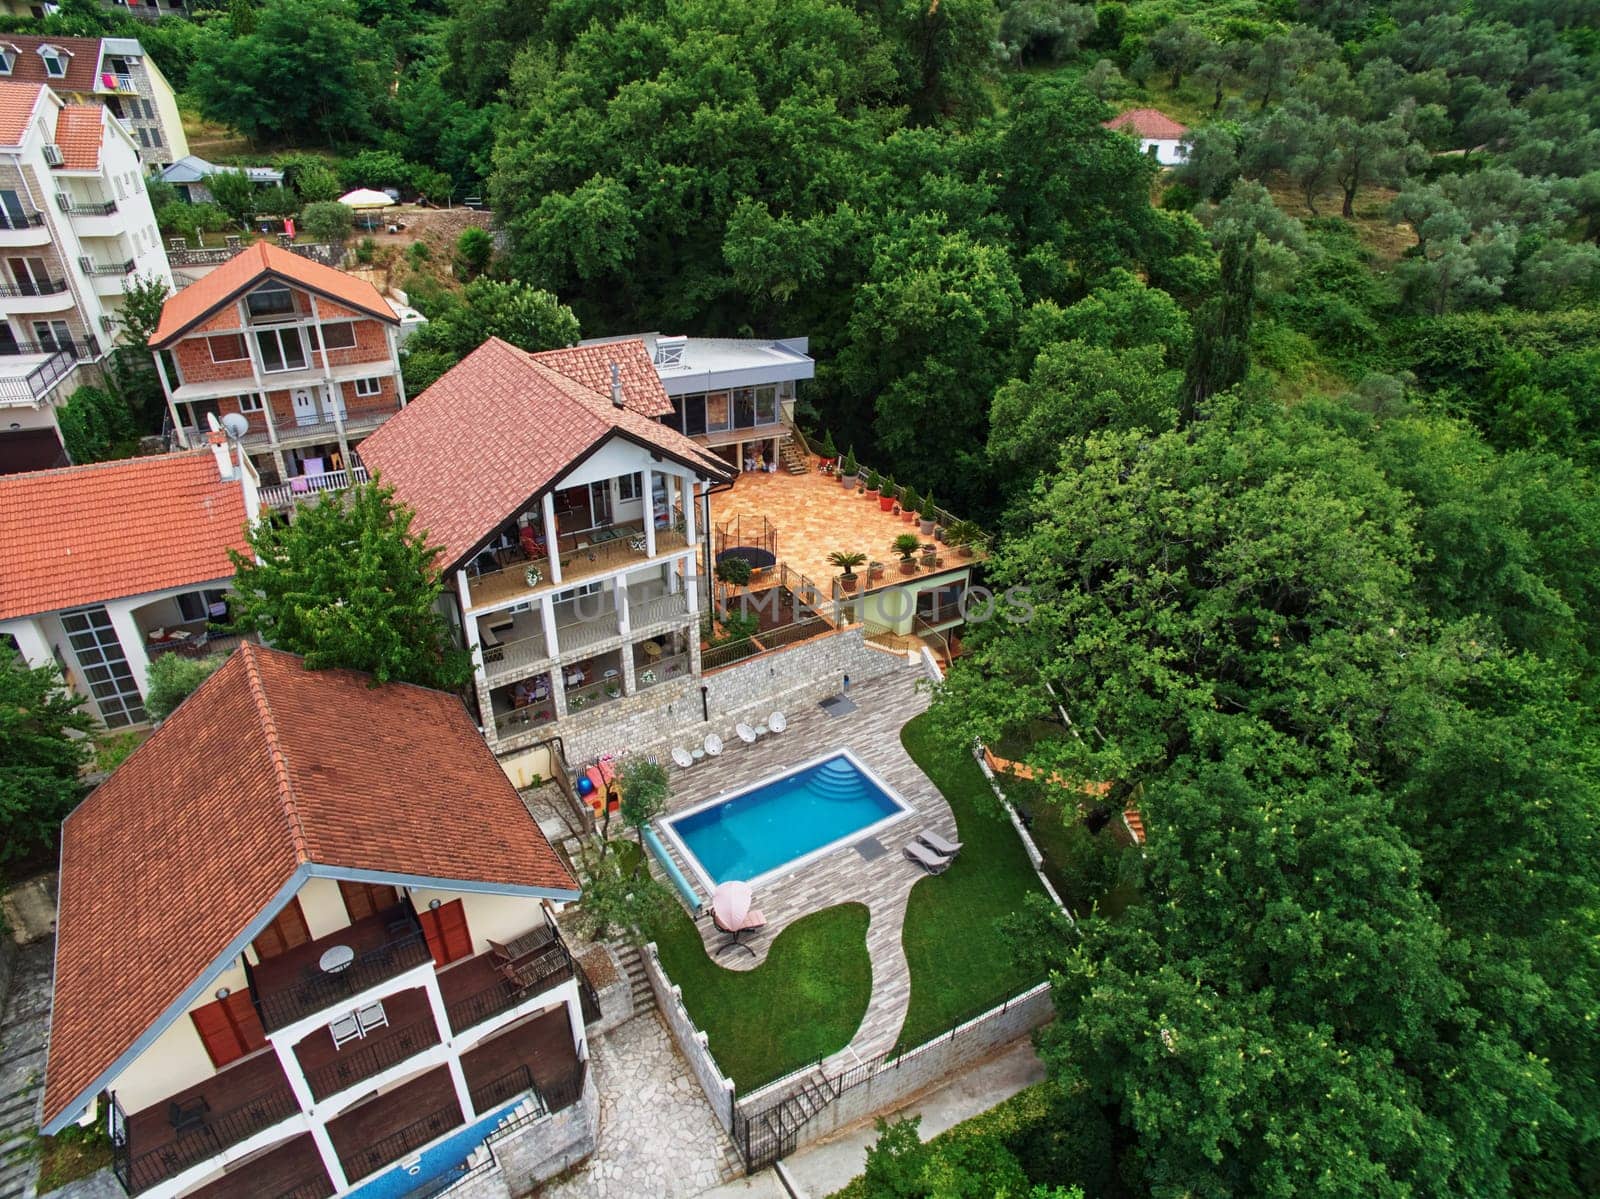 Cozy mansion with a swimming pool among green trees. Drone. High quality photo